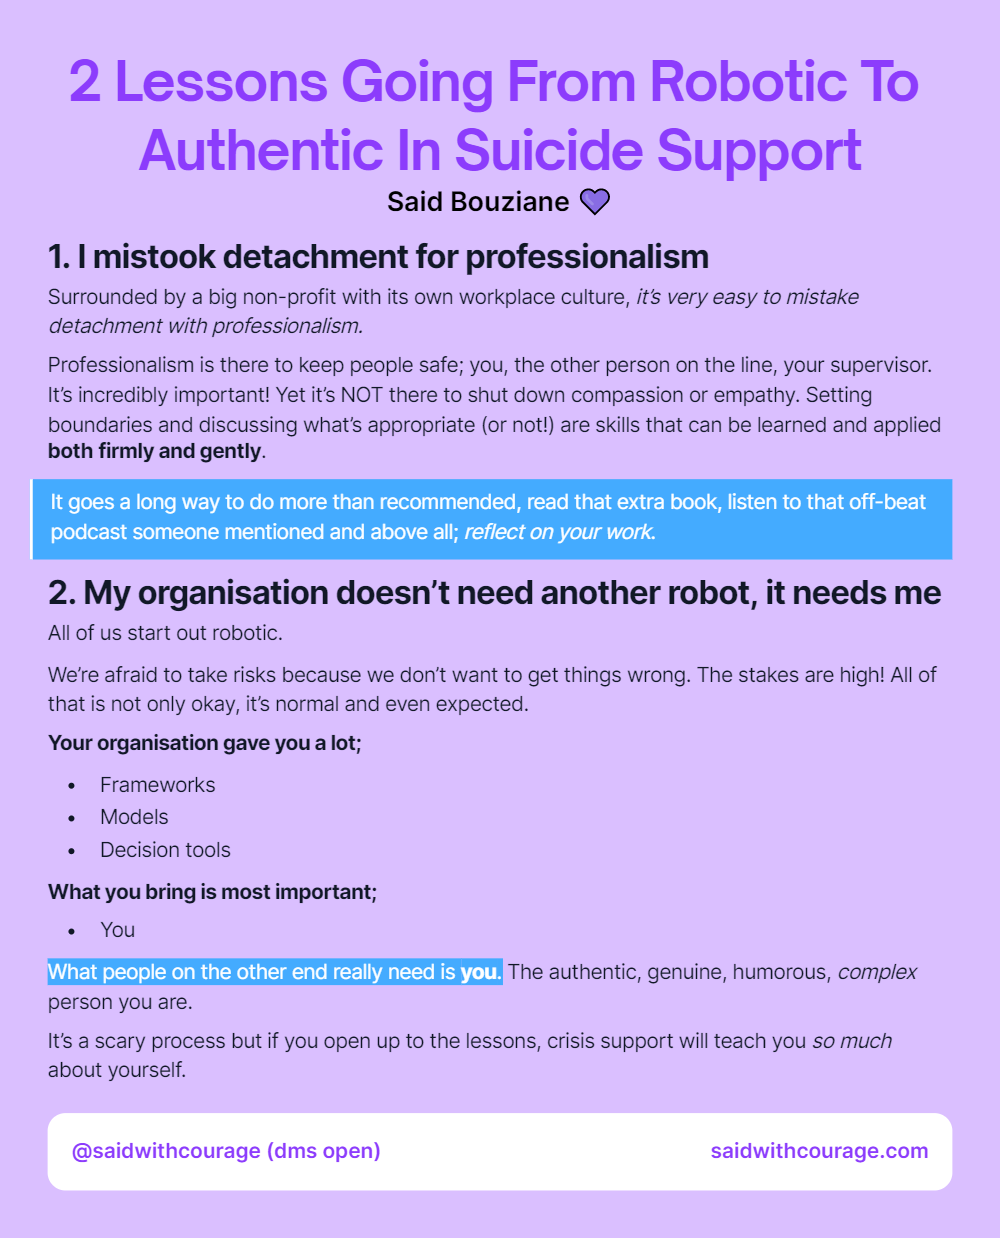 2 Lessons Going From Robotic To Authentic In Suicide Support